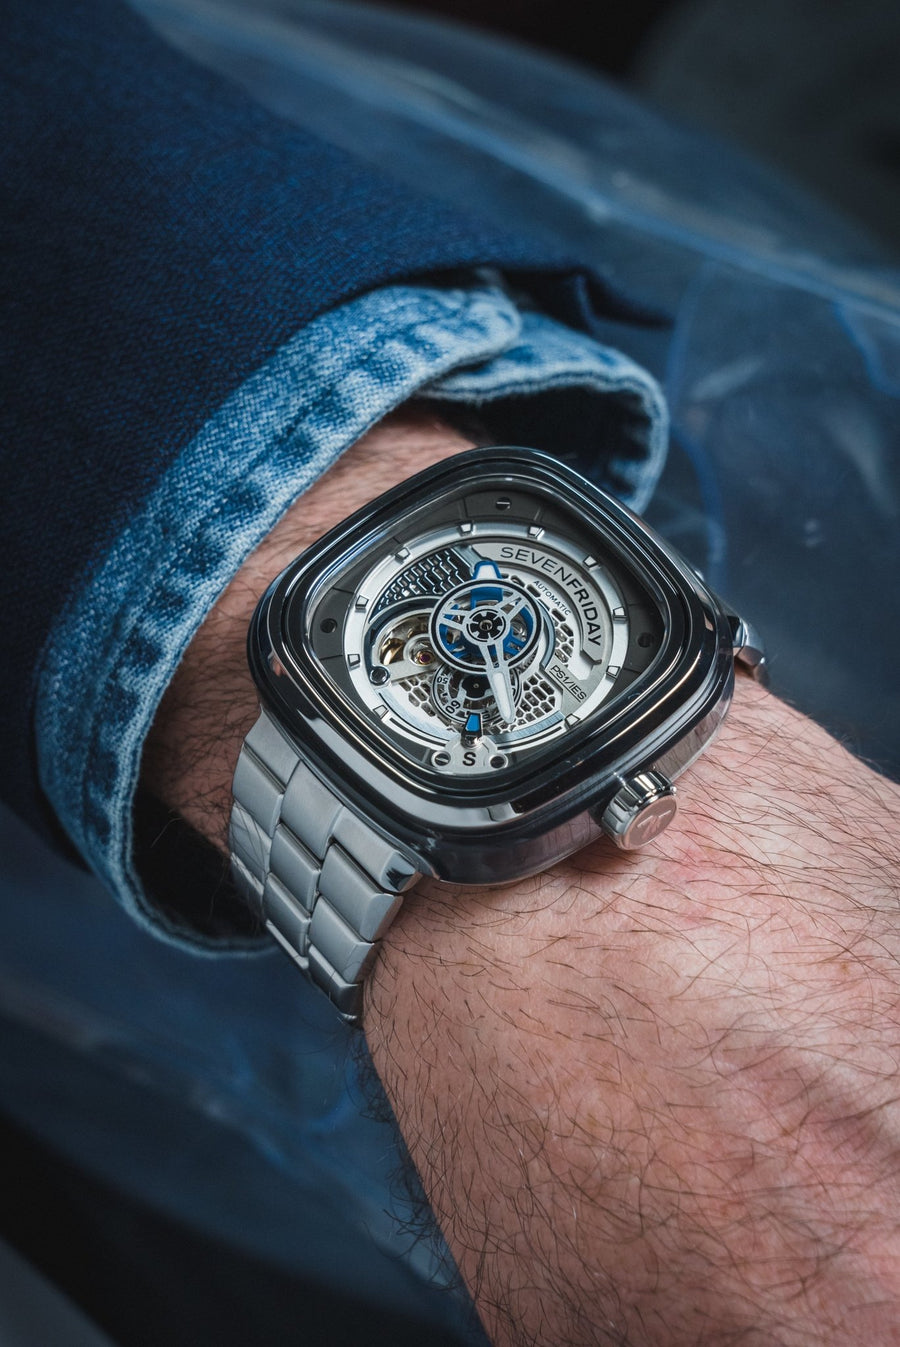 SEVENFRIDAY PS1/01 - The Independent Collective